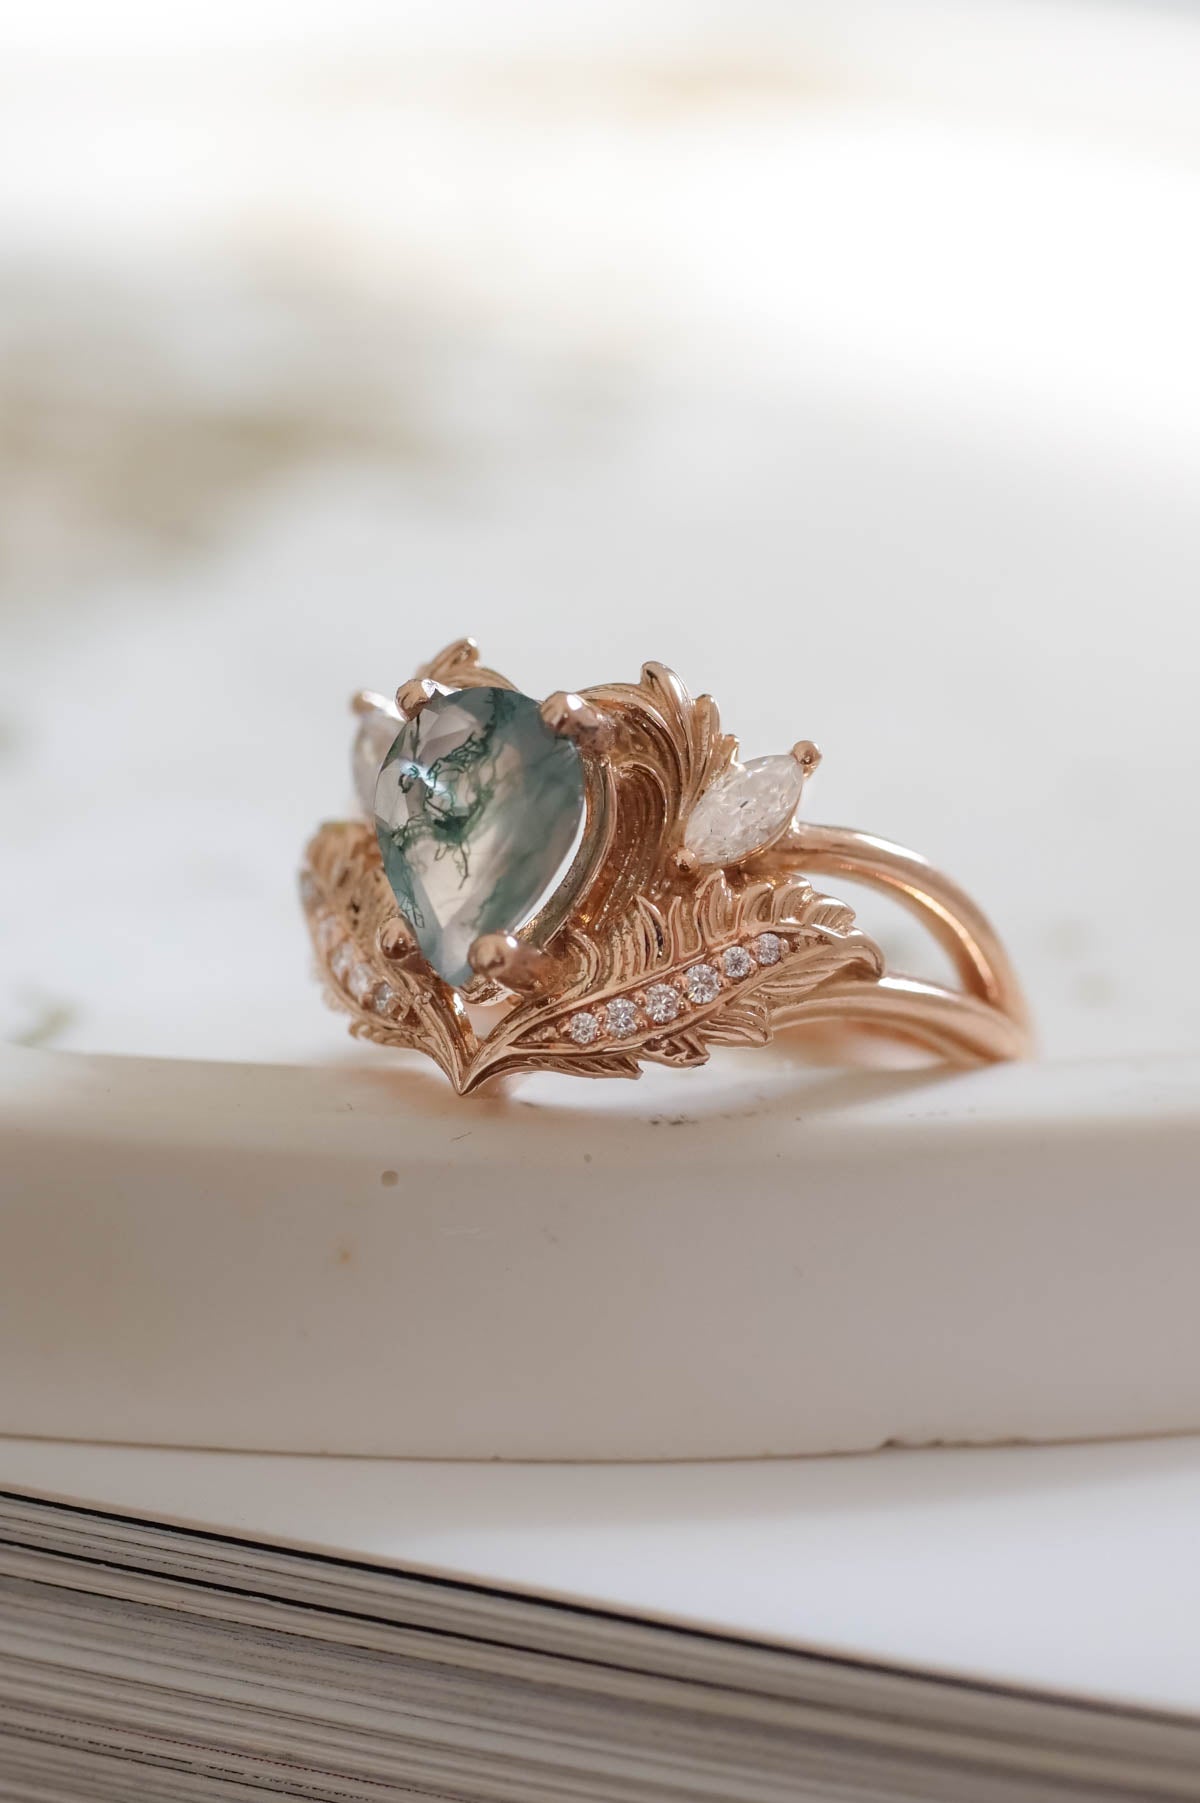 Natural moss agate engagement ring, rose gold proposal ring with diamonds / Adonis - Eden Garden Jewelry™